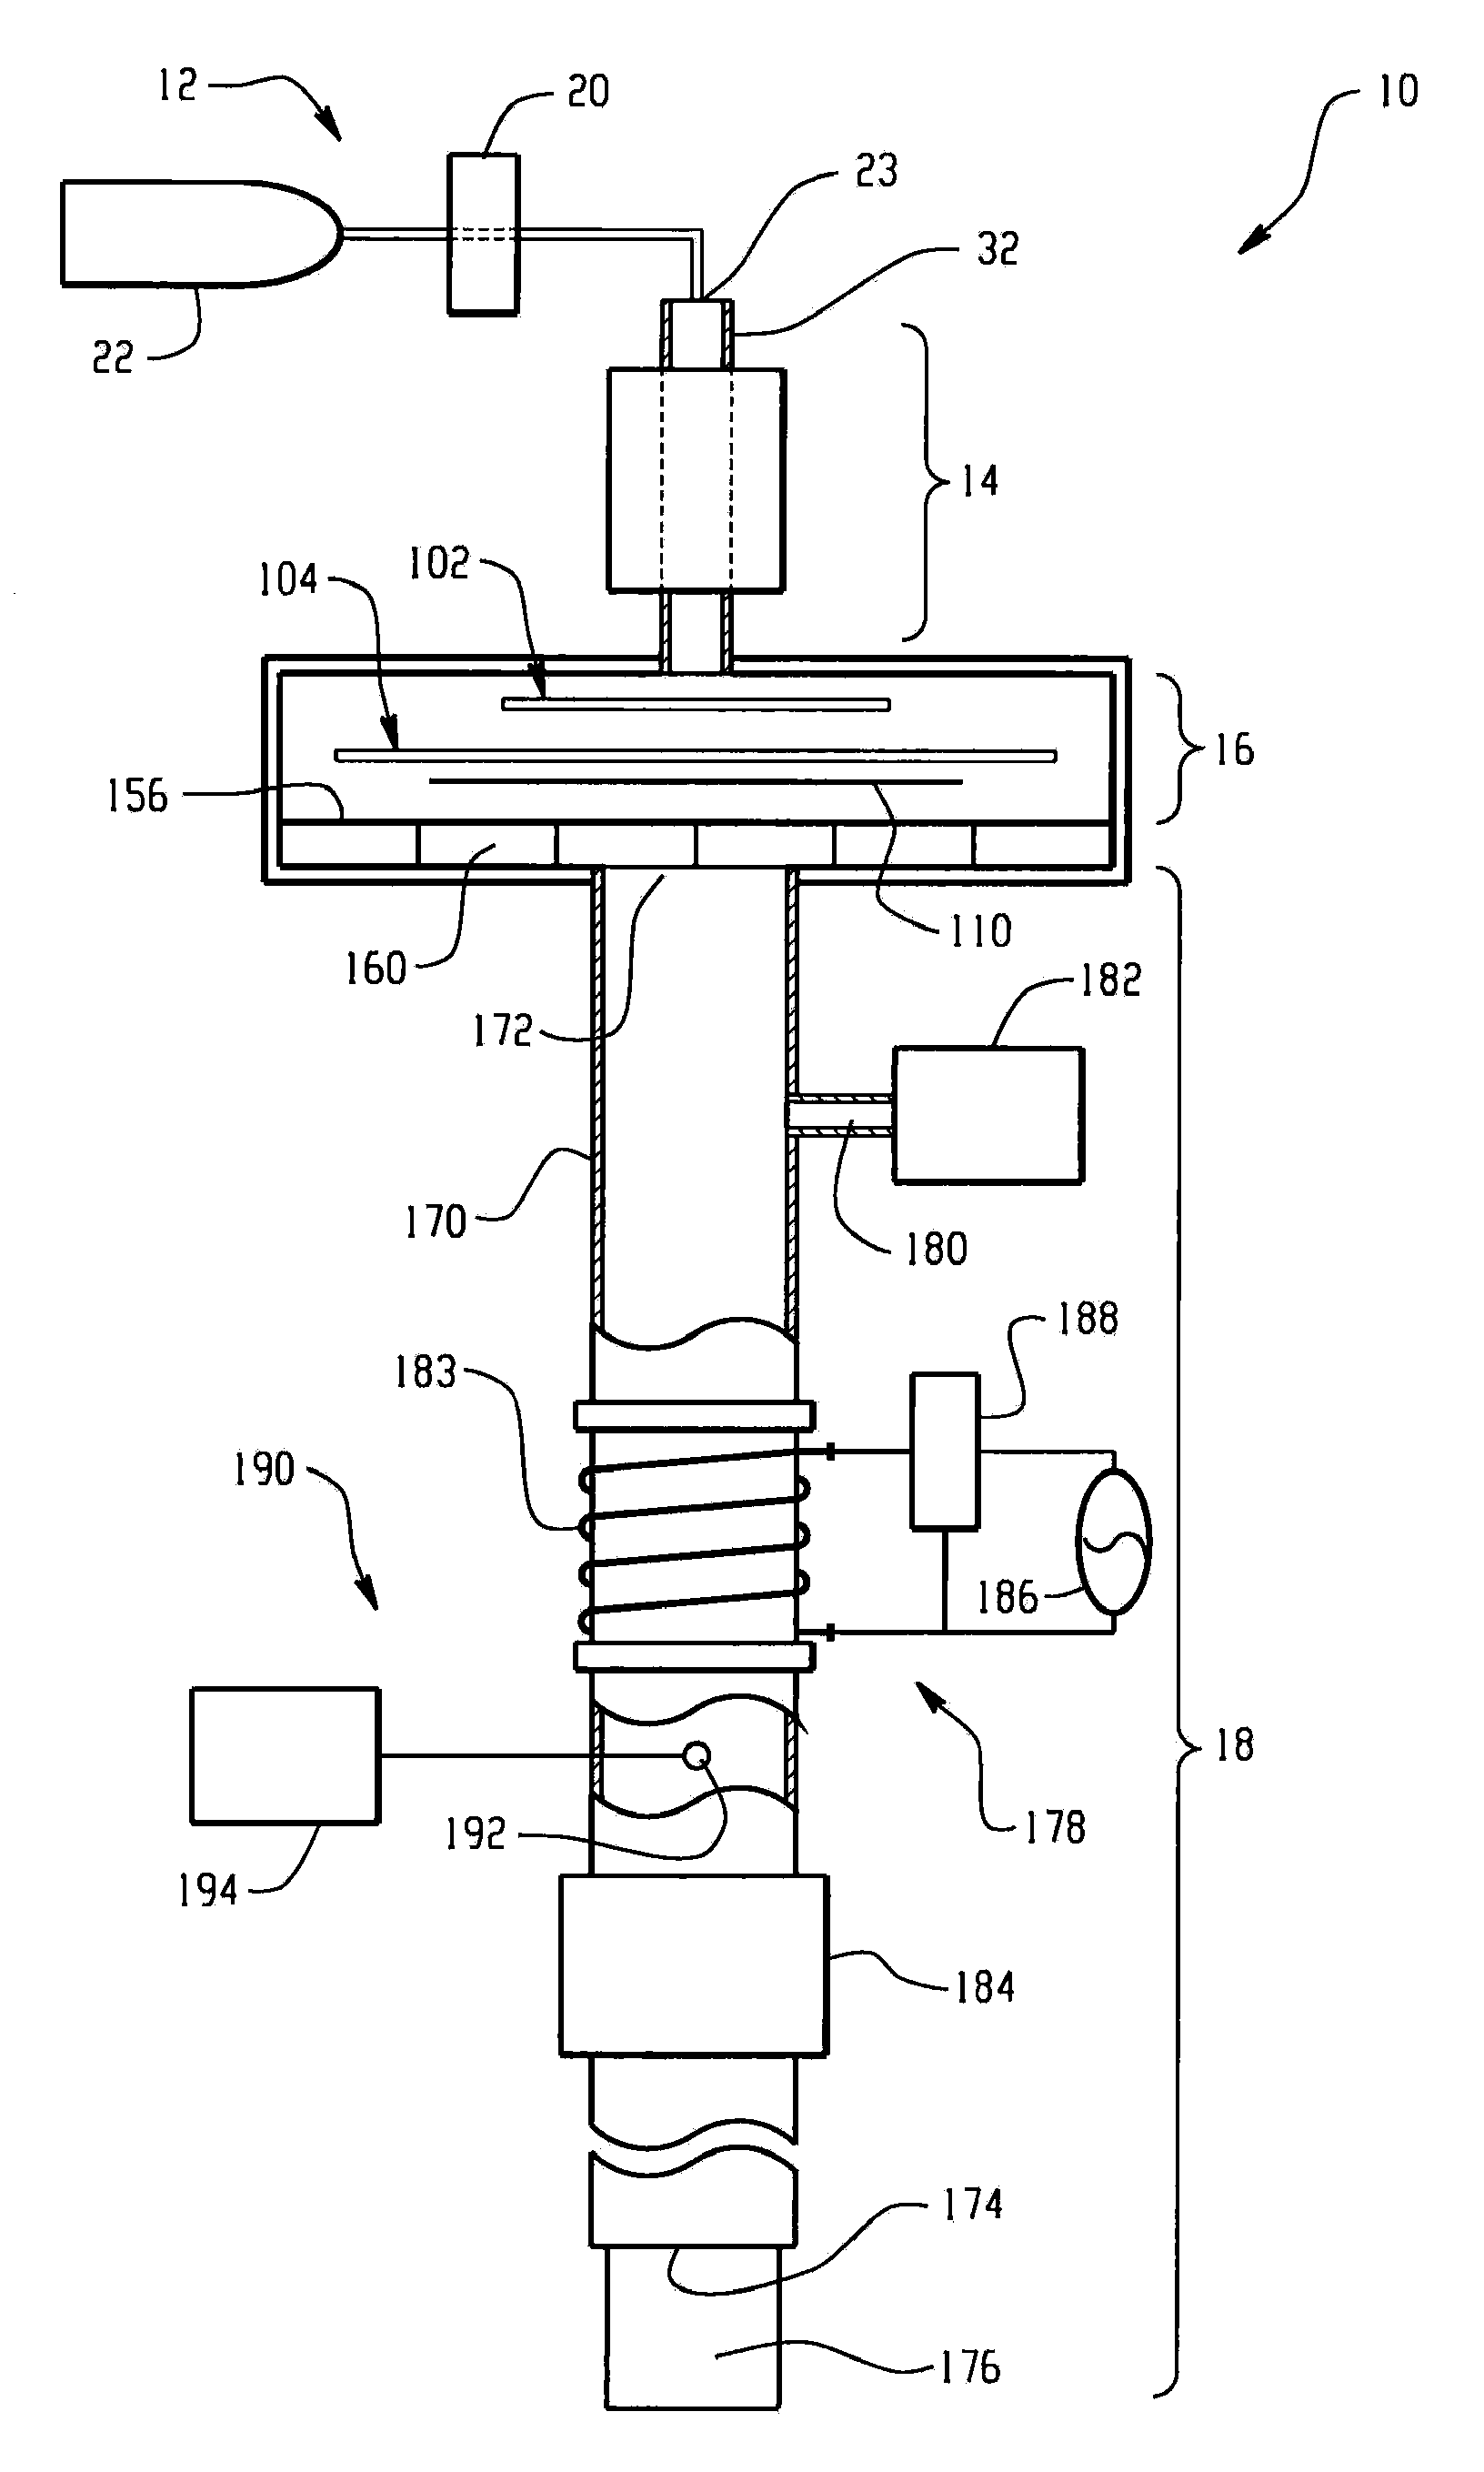 Plasma ashing apparatus and endpoint detection process